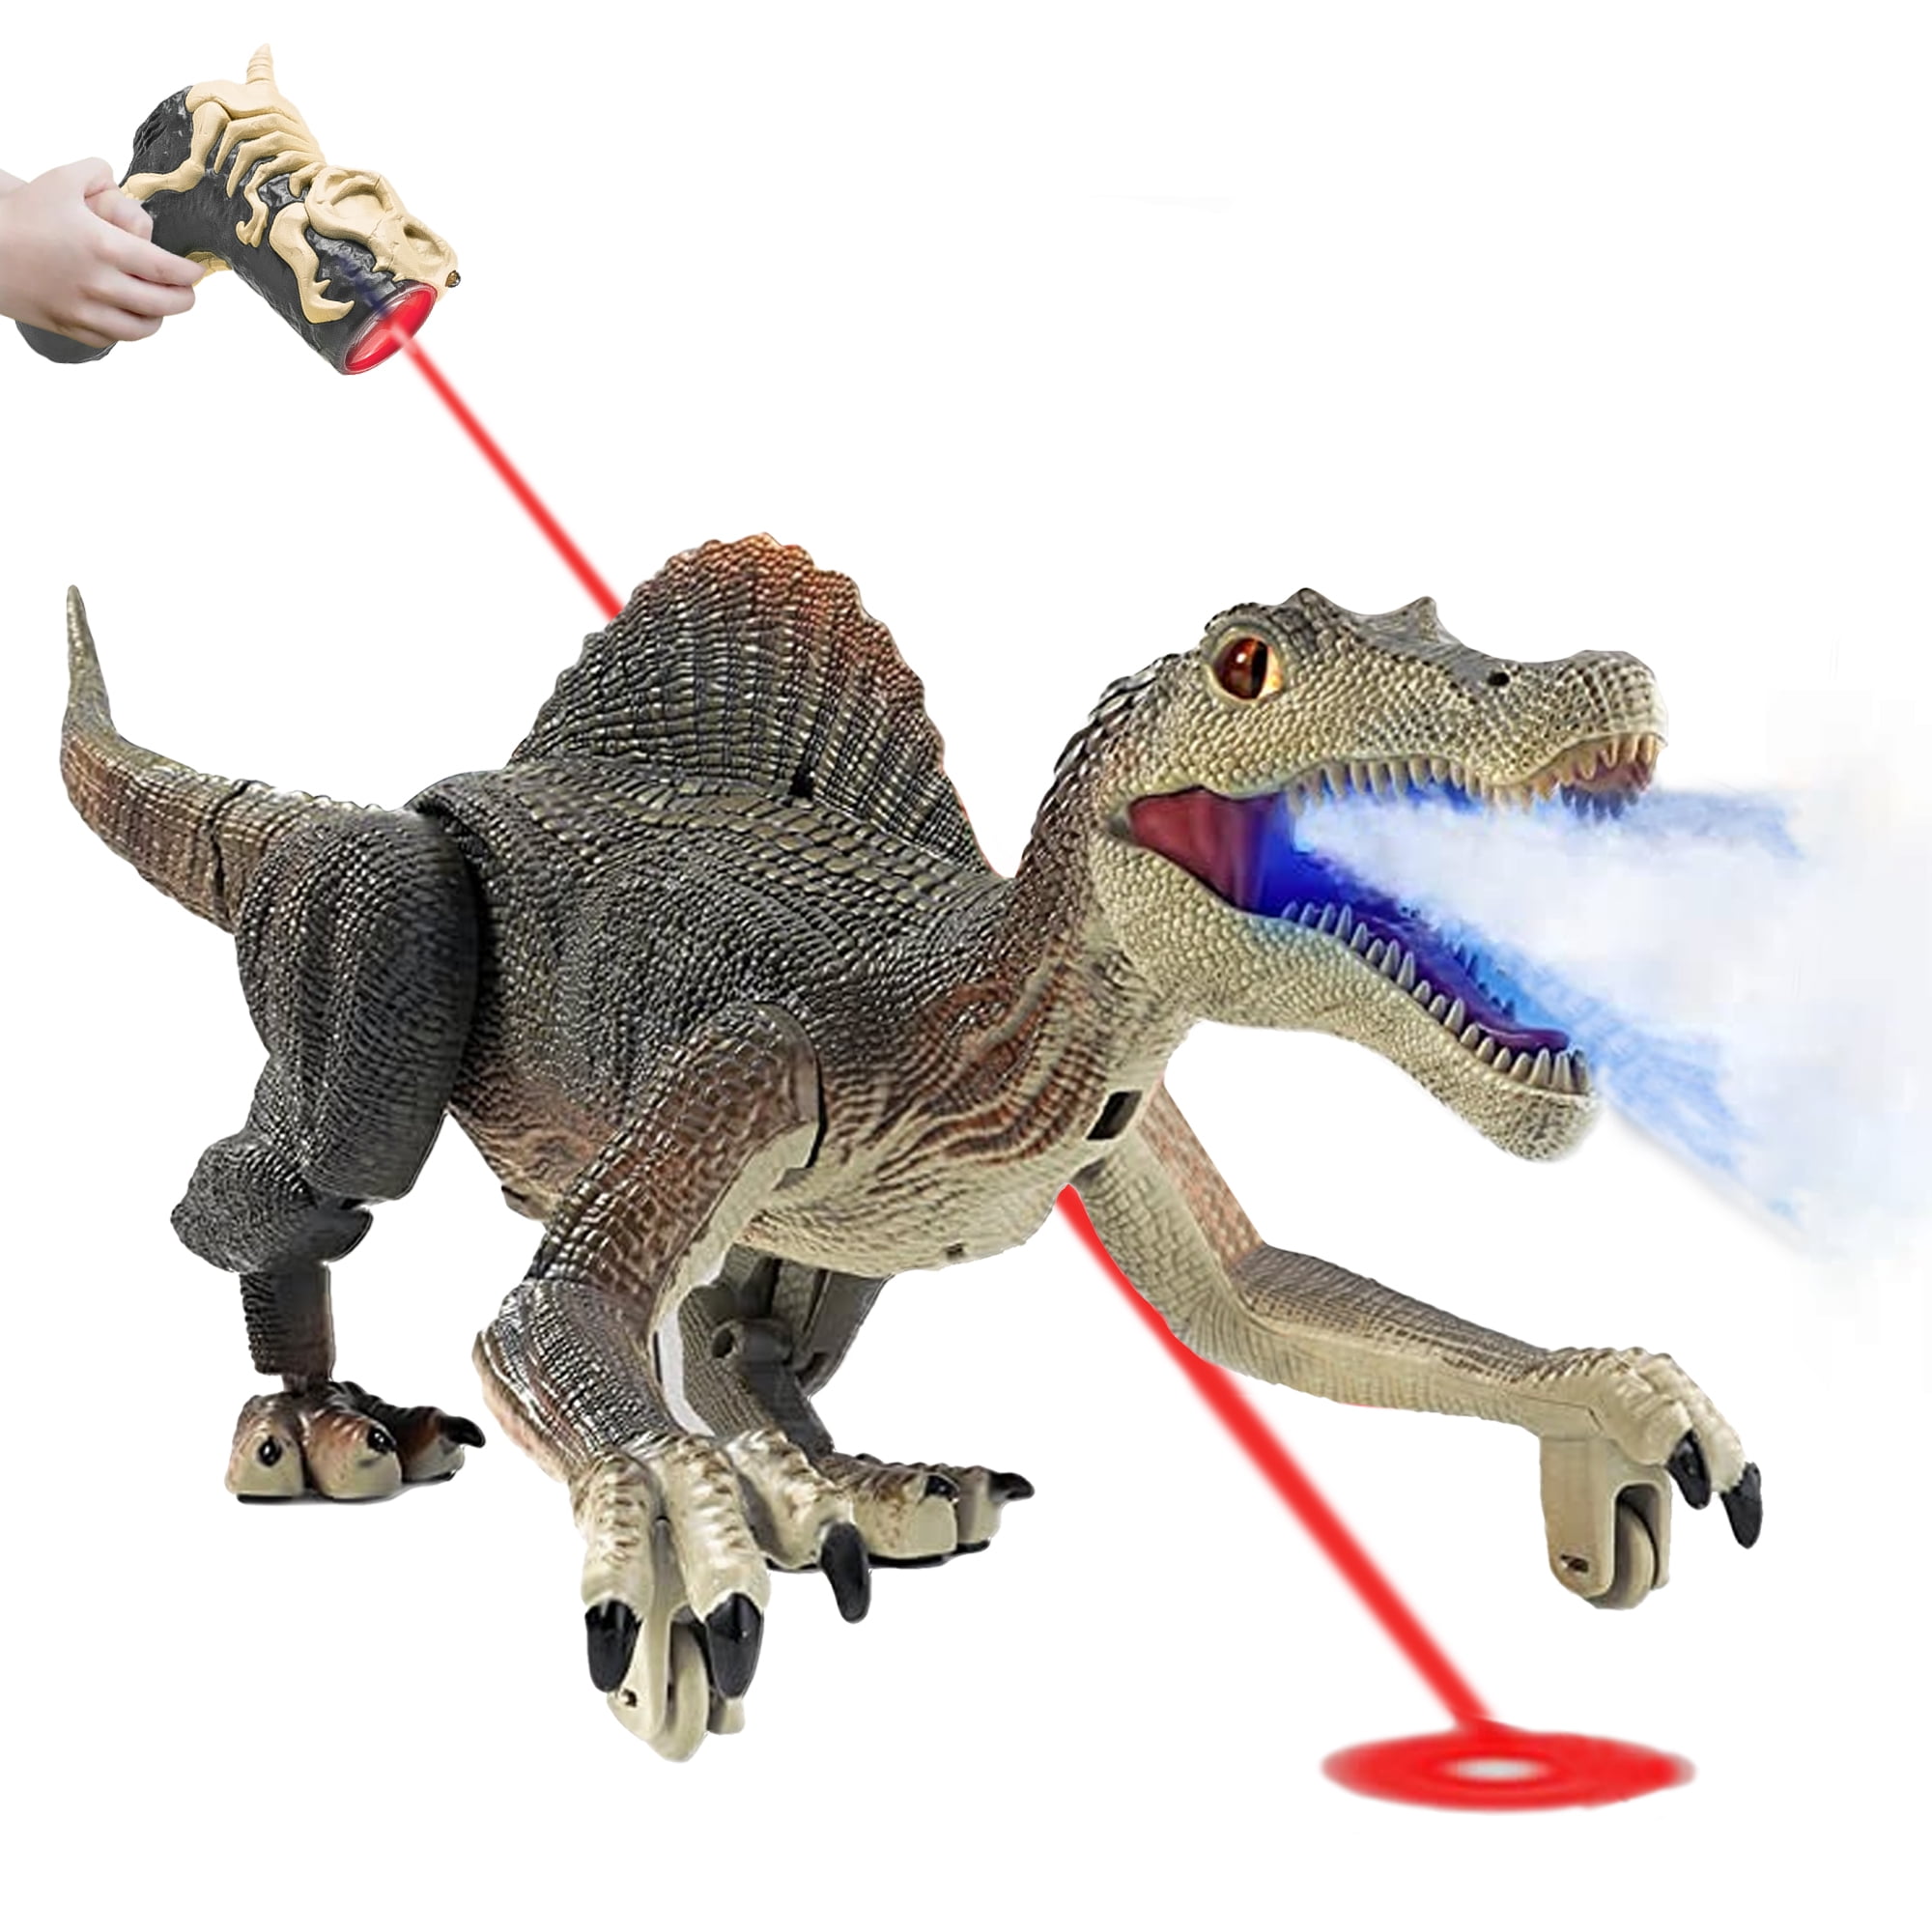 Richgv Remote Control Dinosaur Toys for Kid - Walking RC Dinosaur Toys for Boys 5-7，RC Jurassic Spinosaurus Velociraptor Toys 8-12，Robot Dinosaur Toys with Light Sounds Rechargeable